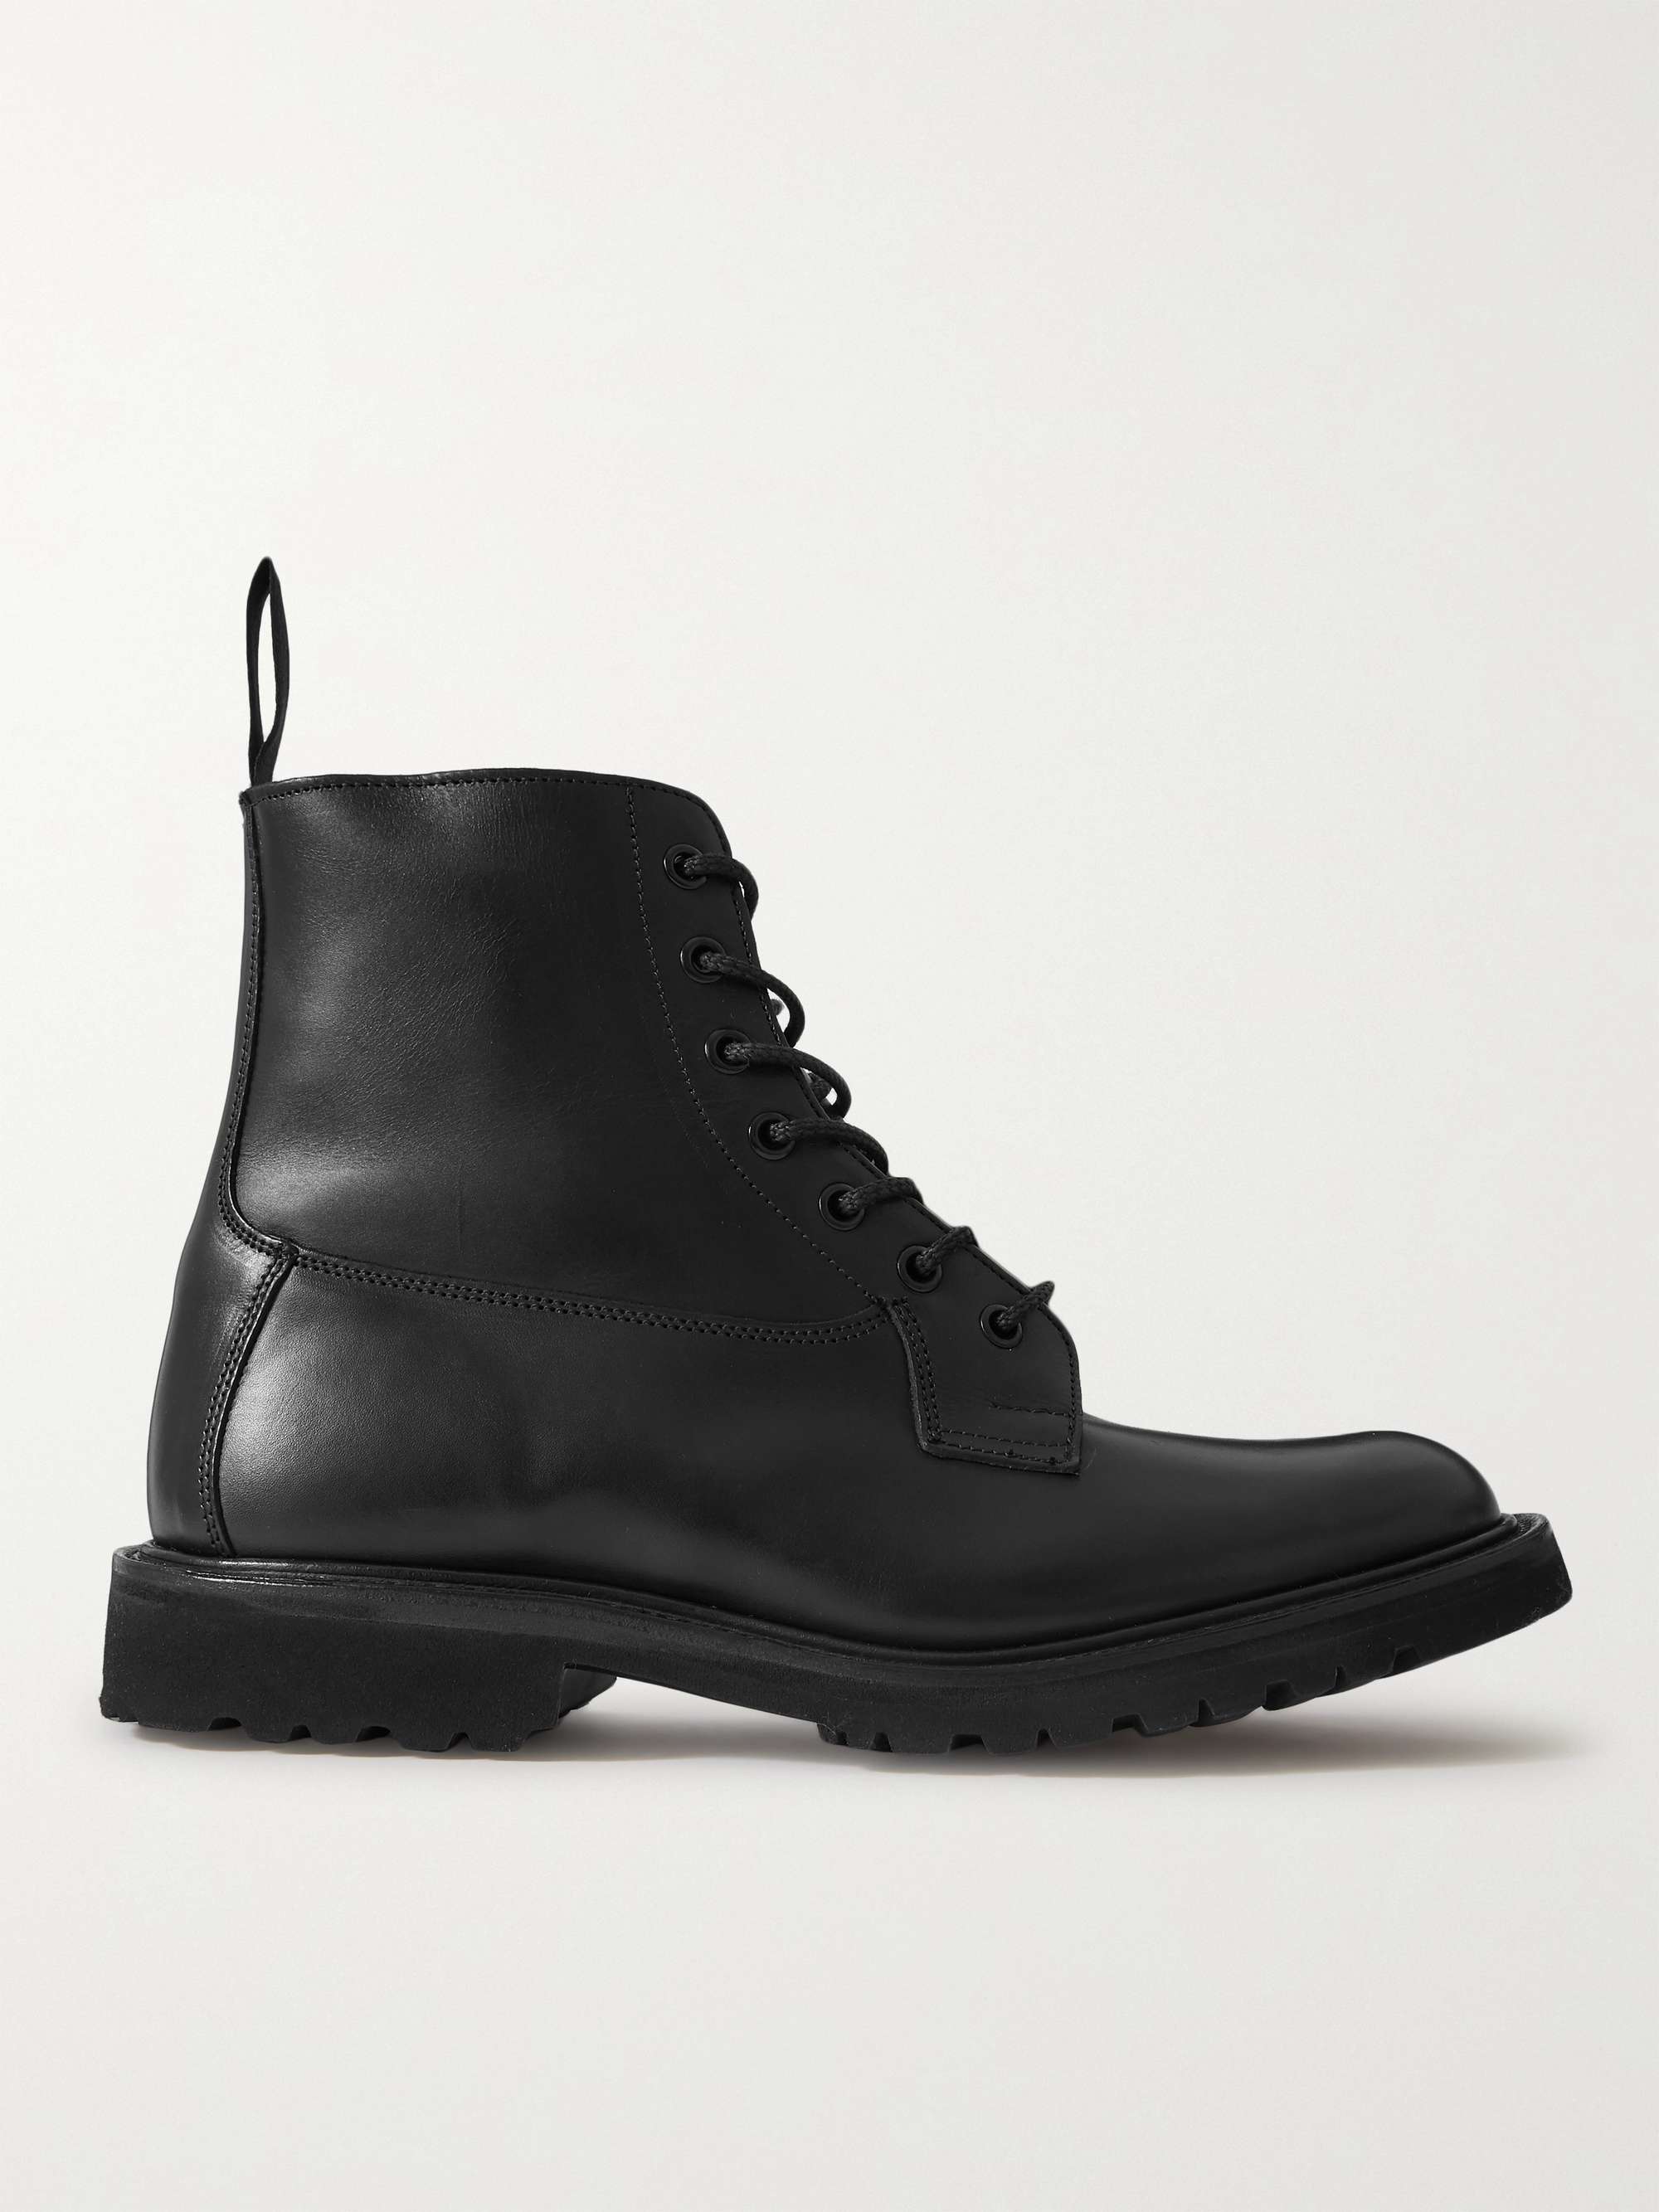 TRICKER'S Burford Leather Boots